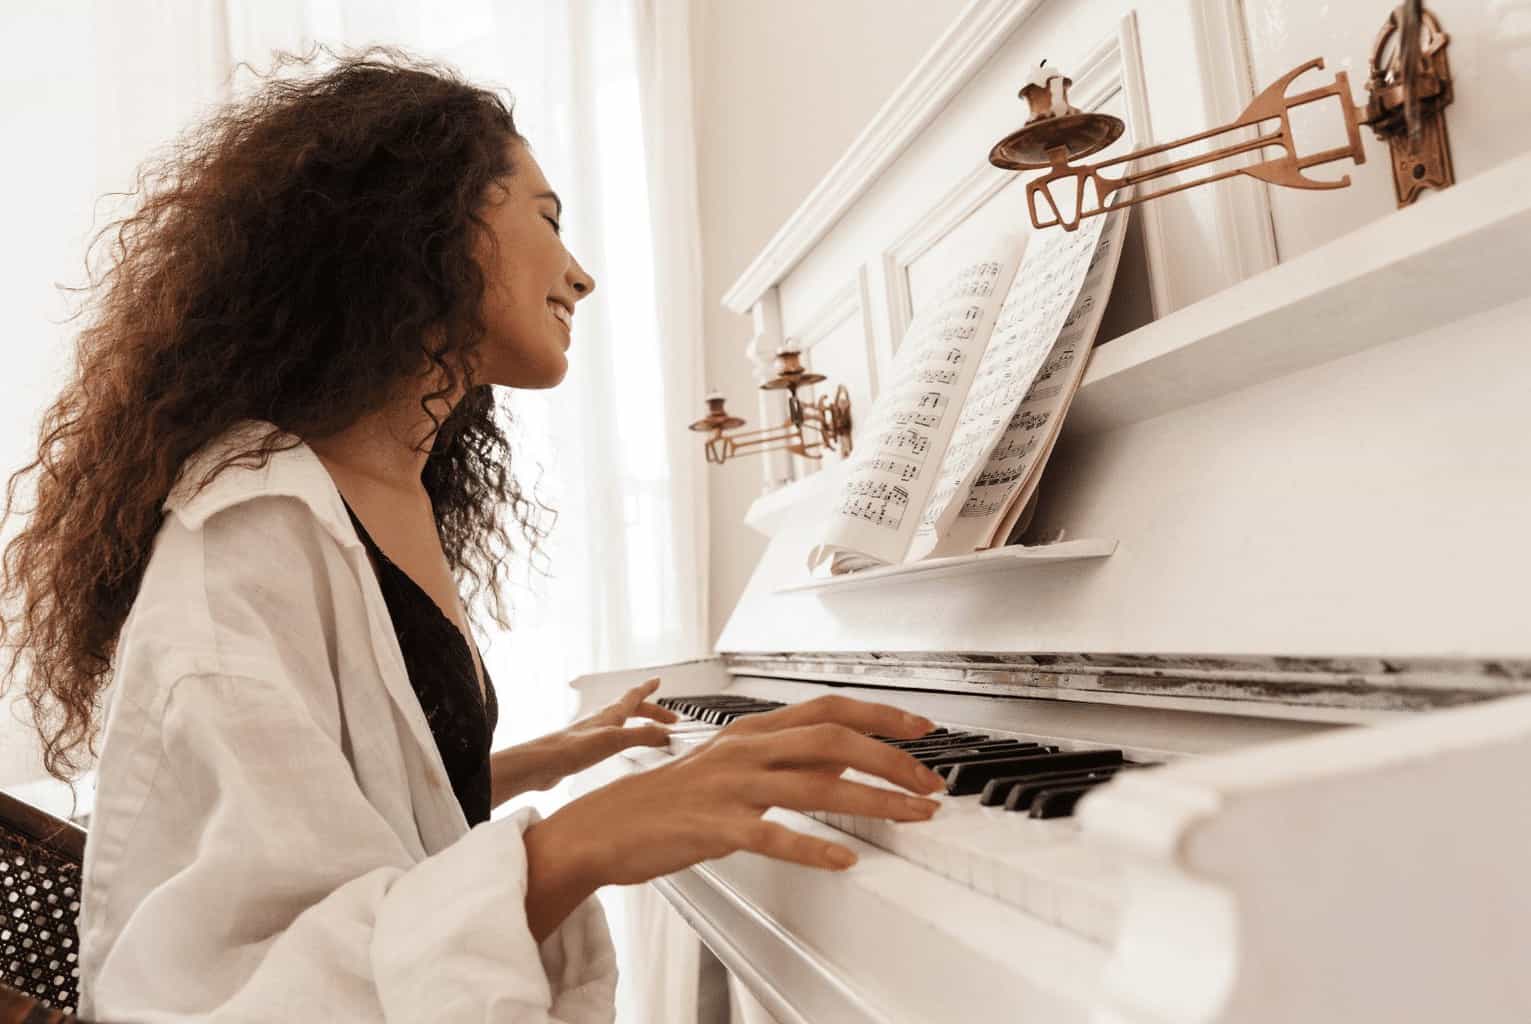 Skoove makes it easy to learn the piano online, in your own time